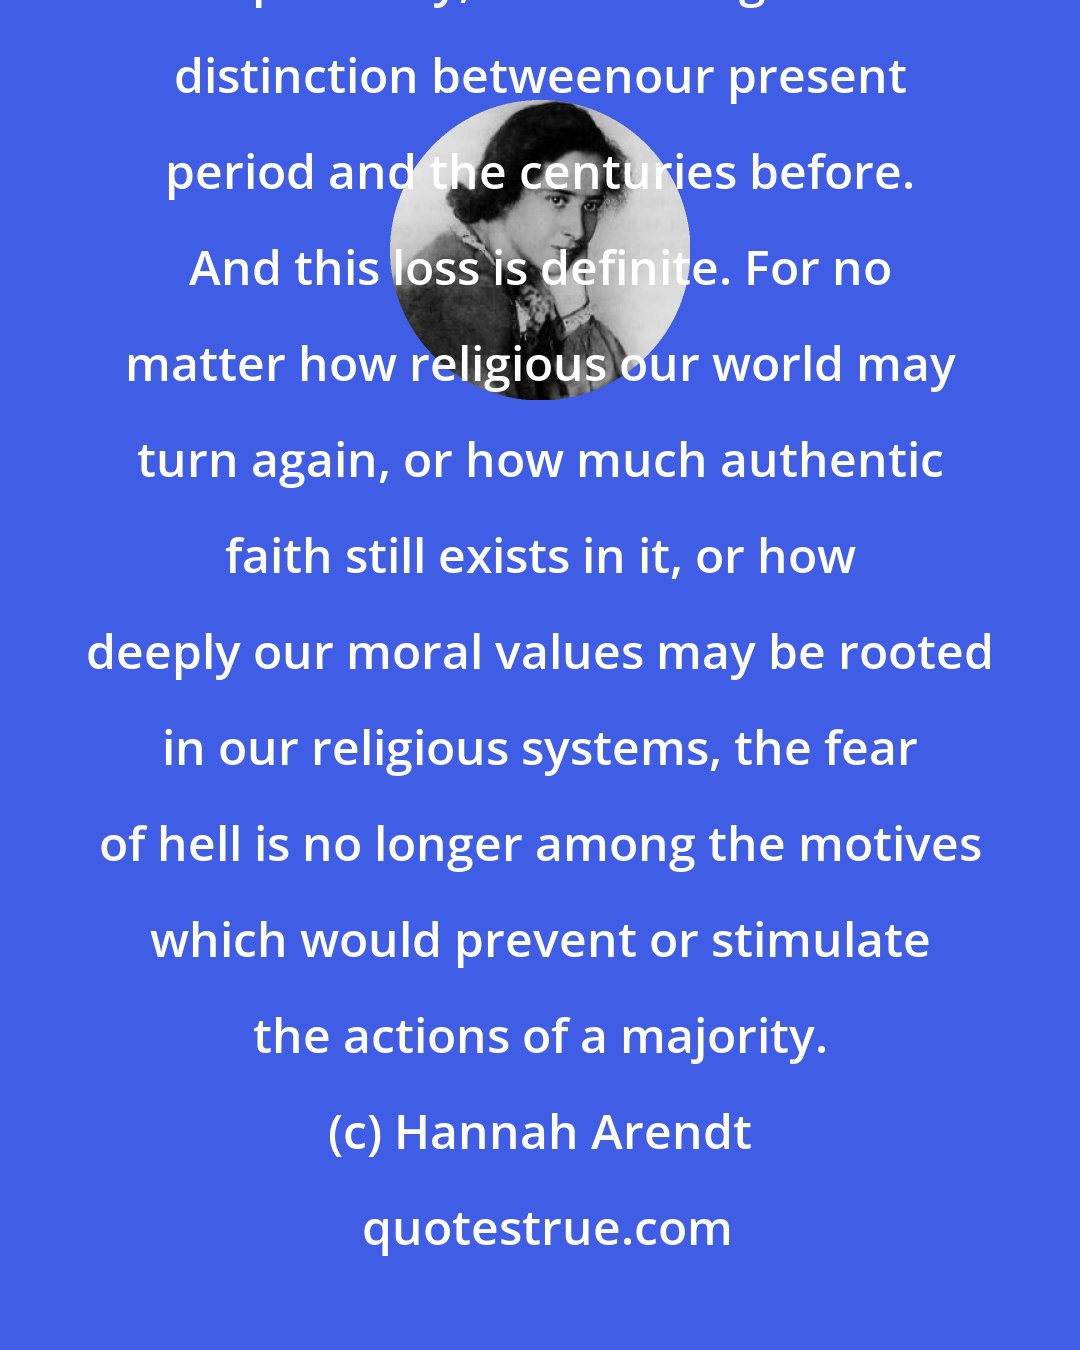 Hannah Arendt: ... the loss of belief in future states is politically, though certainly not spiritually, the most significant distinction betweenour present period and the centuries before. And this loss is definite. For no matter how religious our world may turn again, or how much authentic faith still exists in it, or how deeply our moral values may be rooted in our religious systems, the fear of hell is no longer among the motives which would prevent or stimulate the actions of a majority.